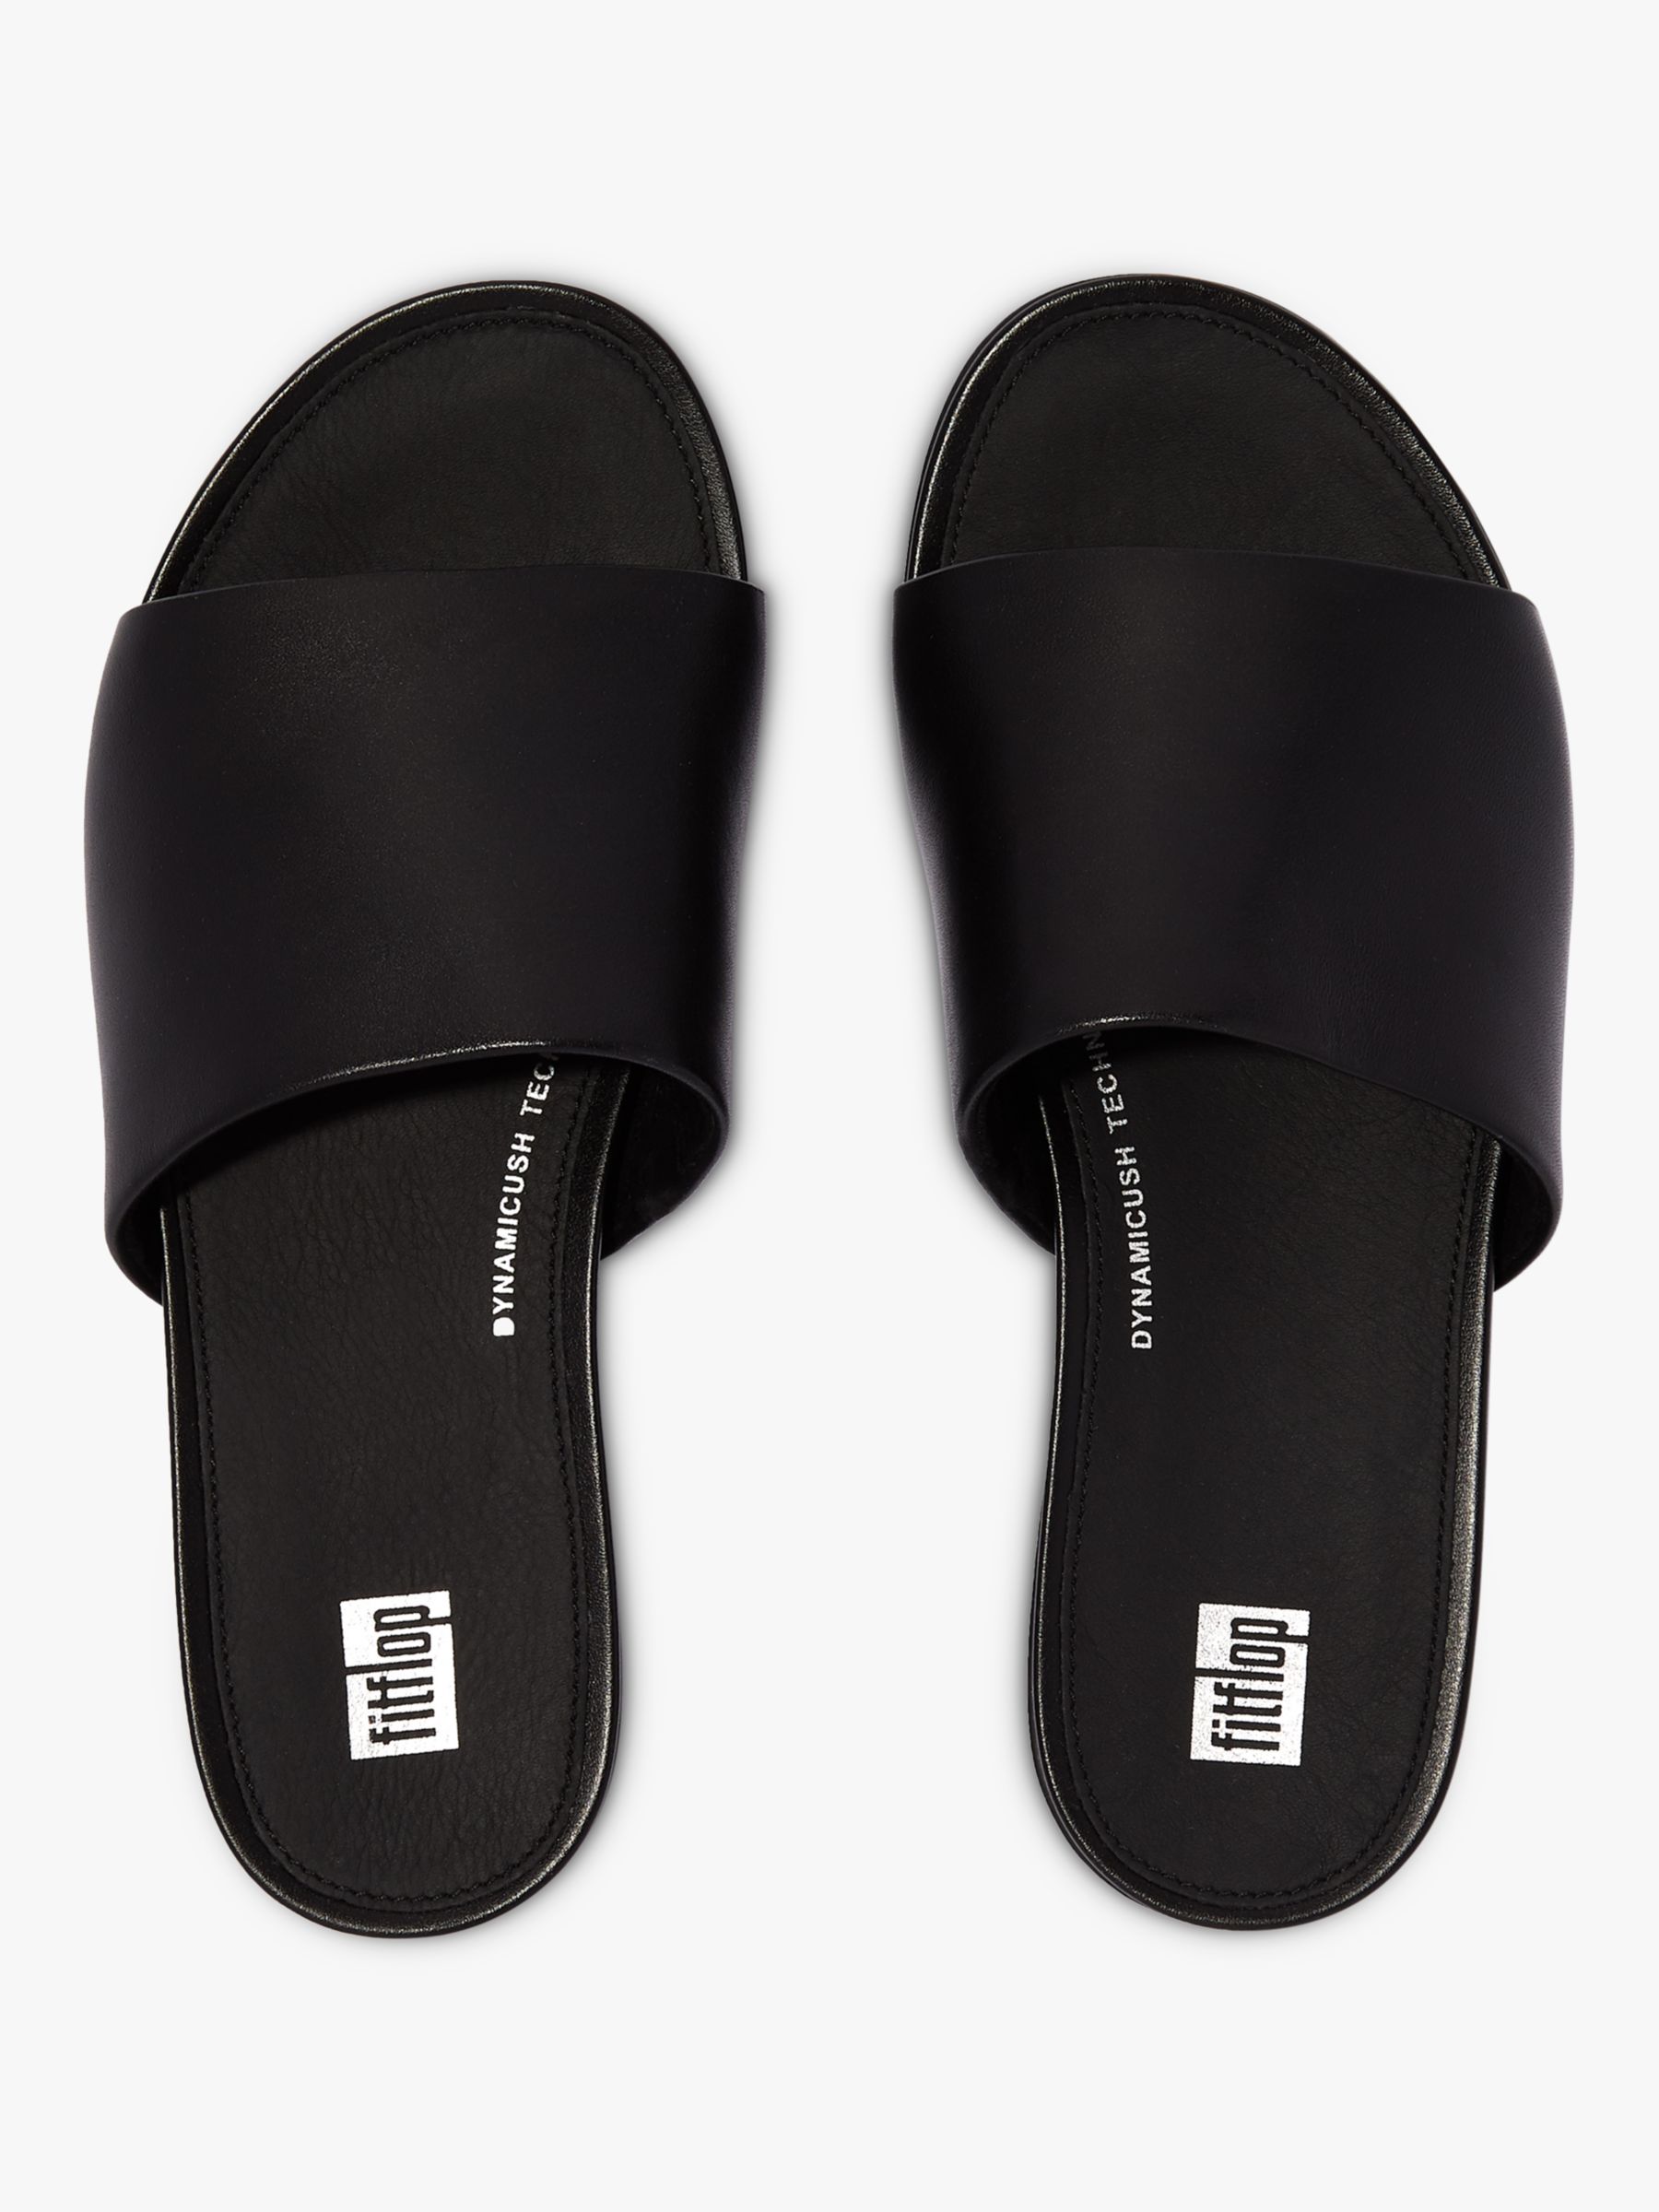 FitFlop Gracie Leather Sliders, All Black at John Lewis & Partners